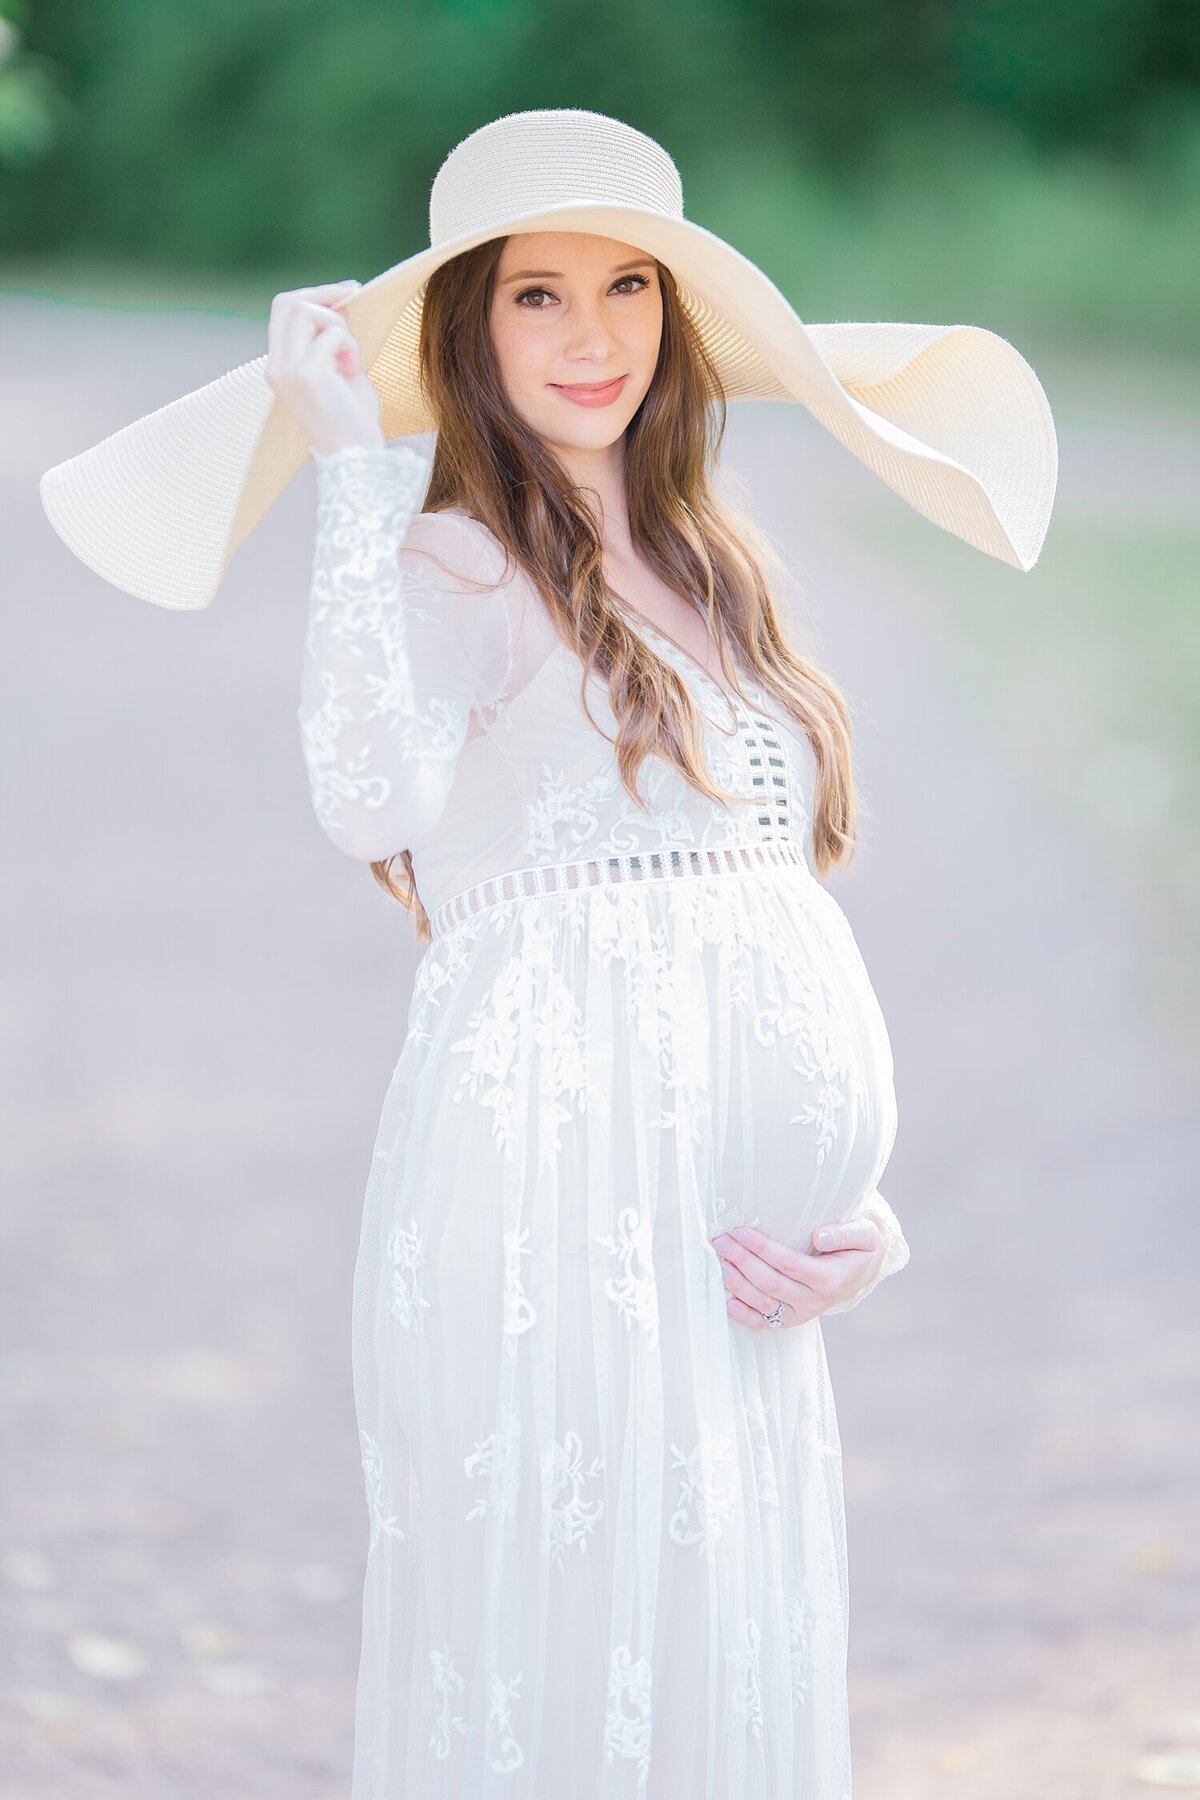 South Dakota Film family Photographer - Maternity photography session in Sioux Falls_0734